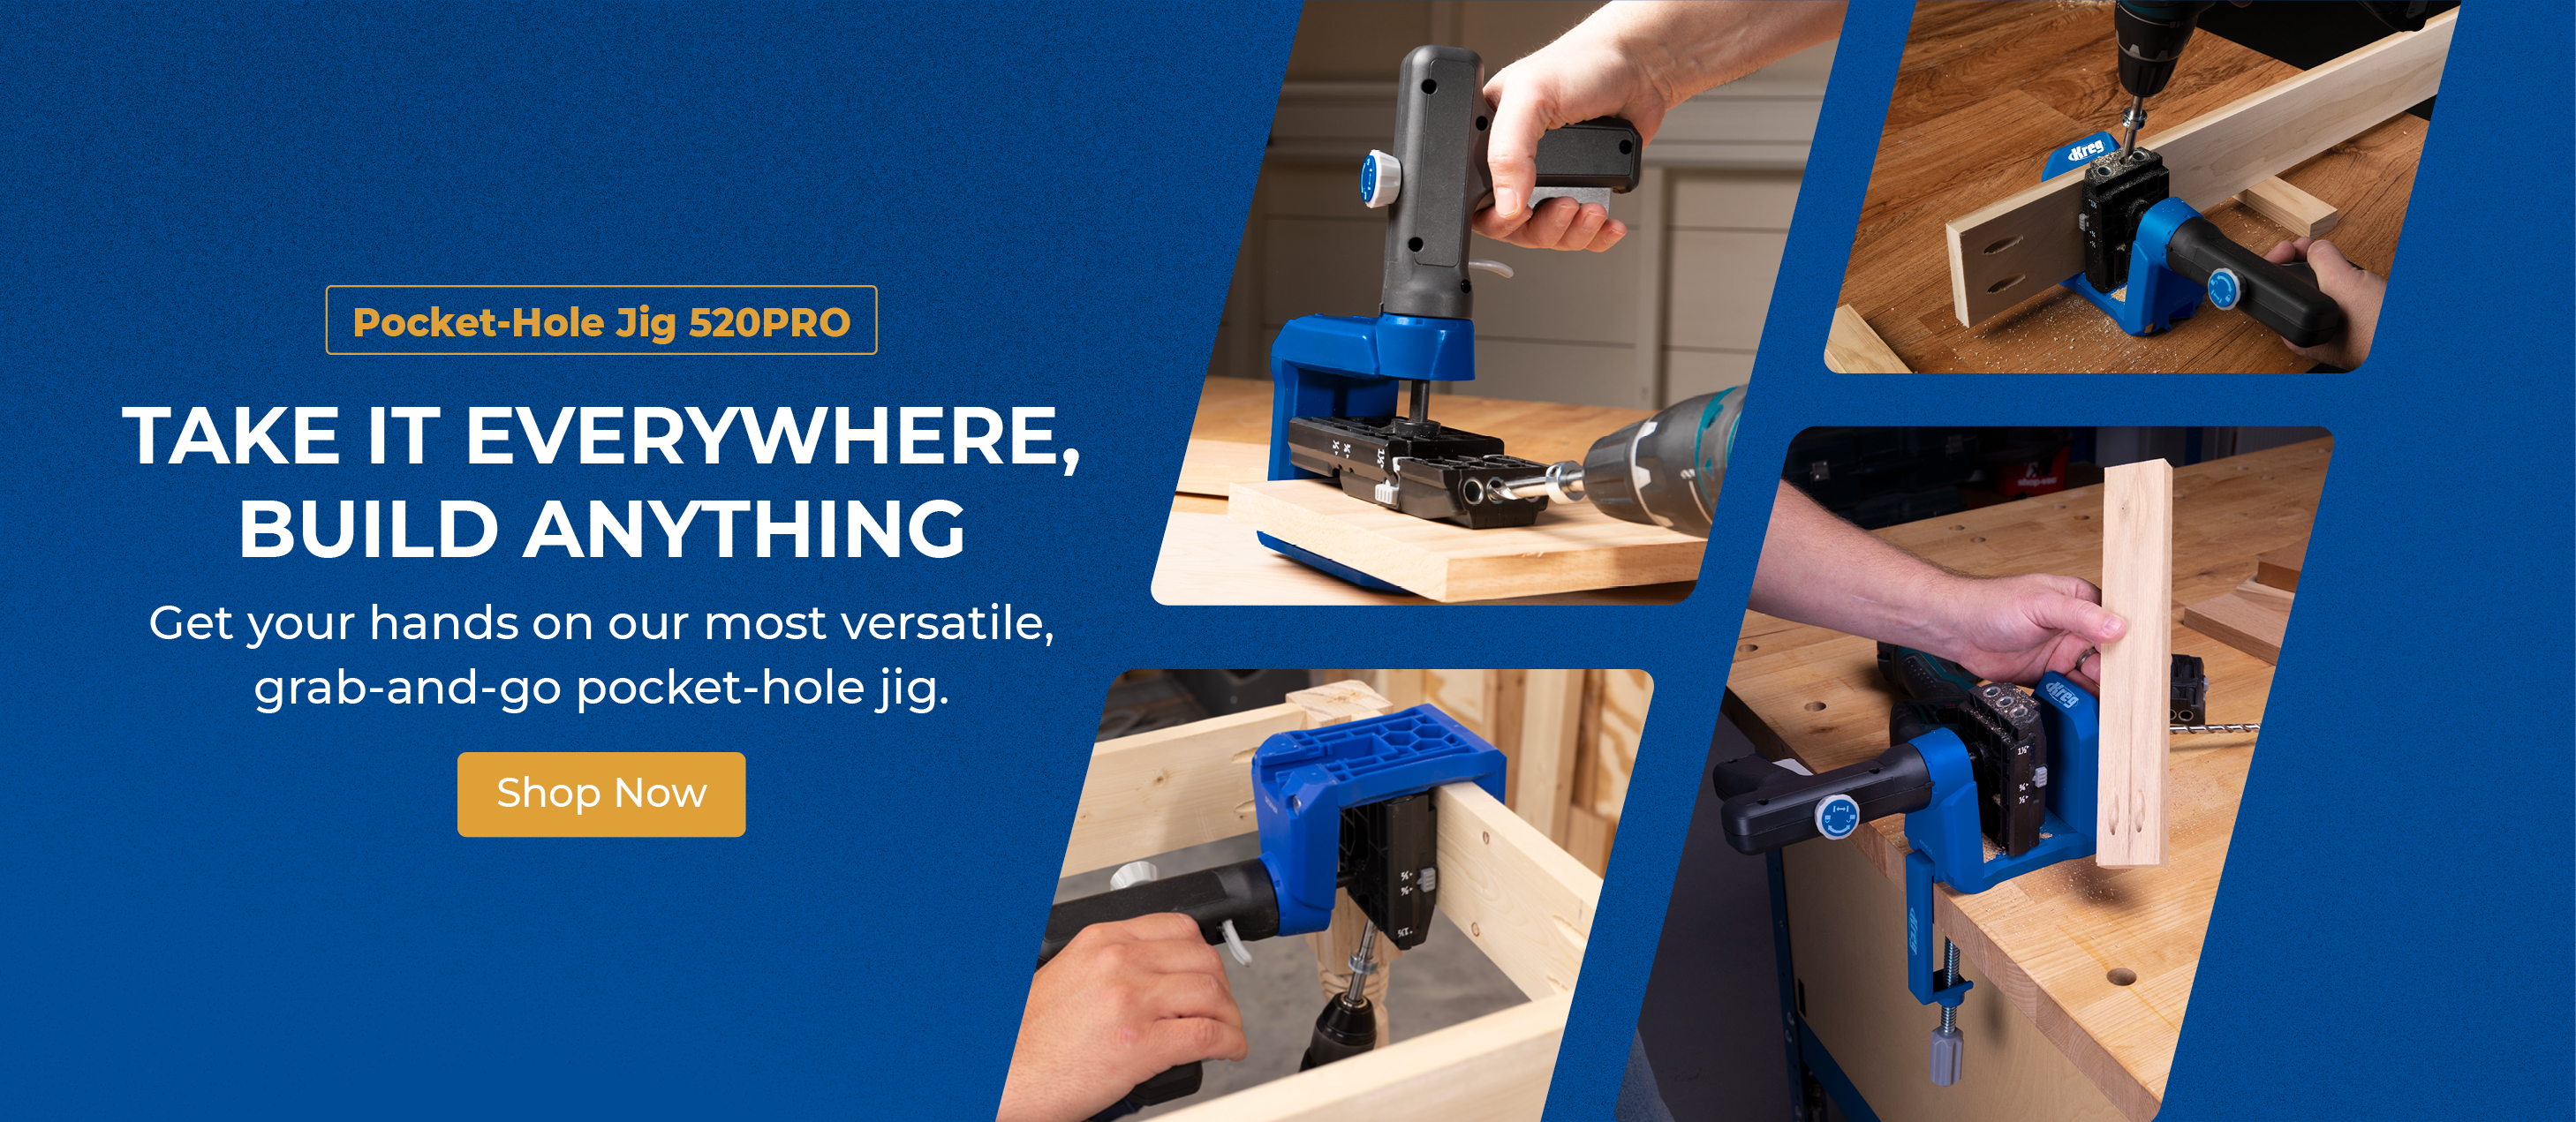 Strong And Simple DIY Wooden Corner Clamps — Free Plans - trend saws -  Medium